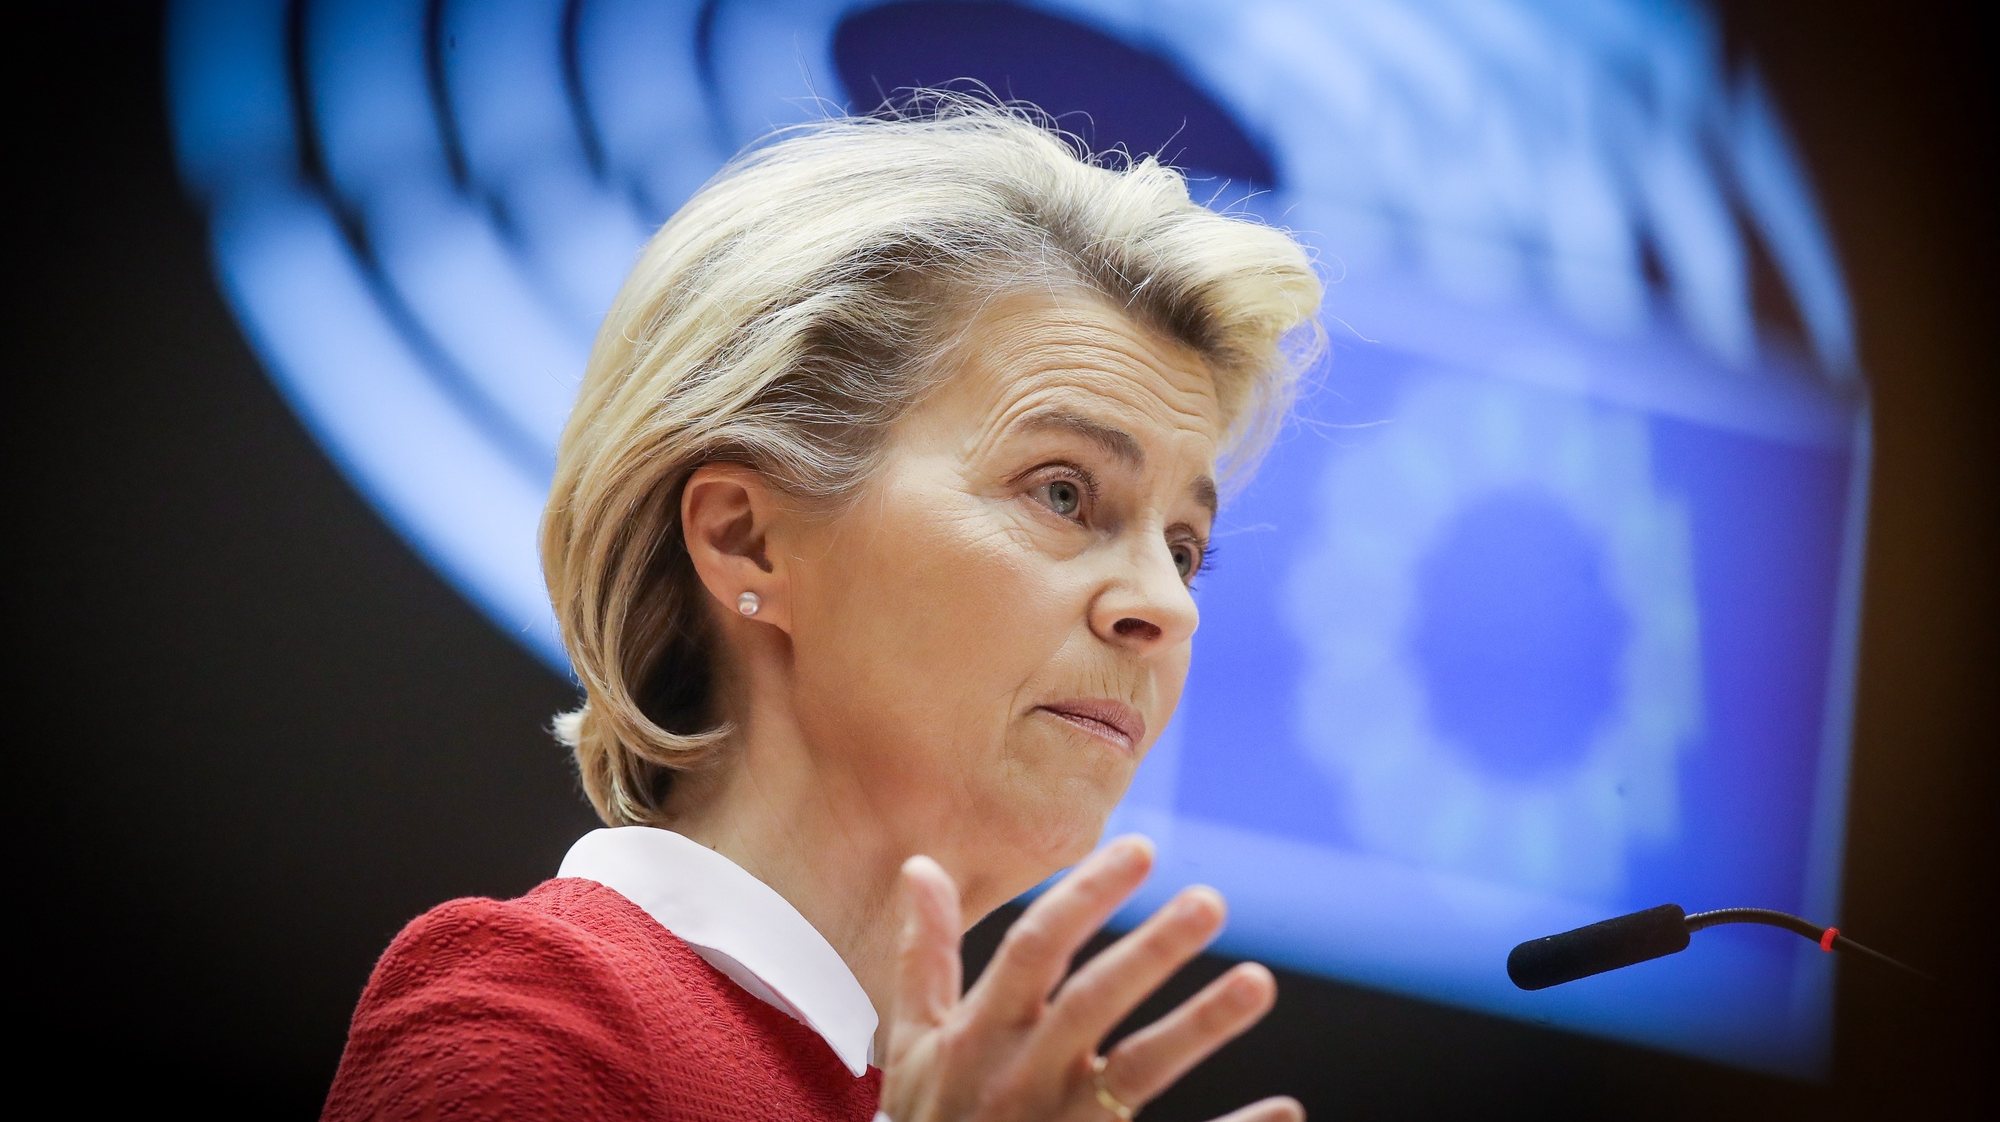 epa09162899 European Commission President Ursula von der Leyen speaks during the debate on EU-UK trade and cooperation agreement during the second day of a plenary session at the European Parliament in Brussels, Belgium, 27 April 2021.  EPA/OLIVIER HOSLET / POOL